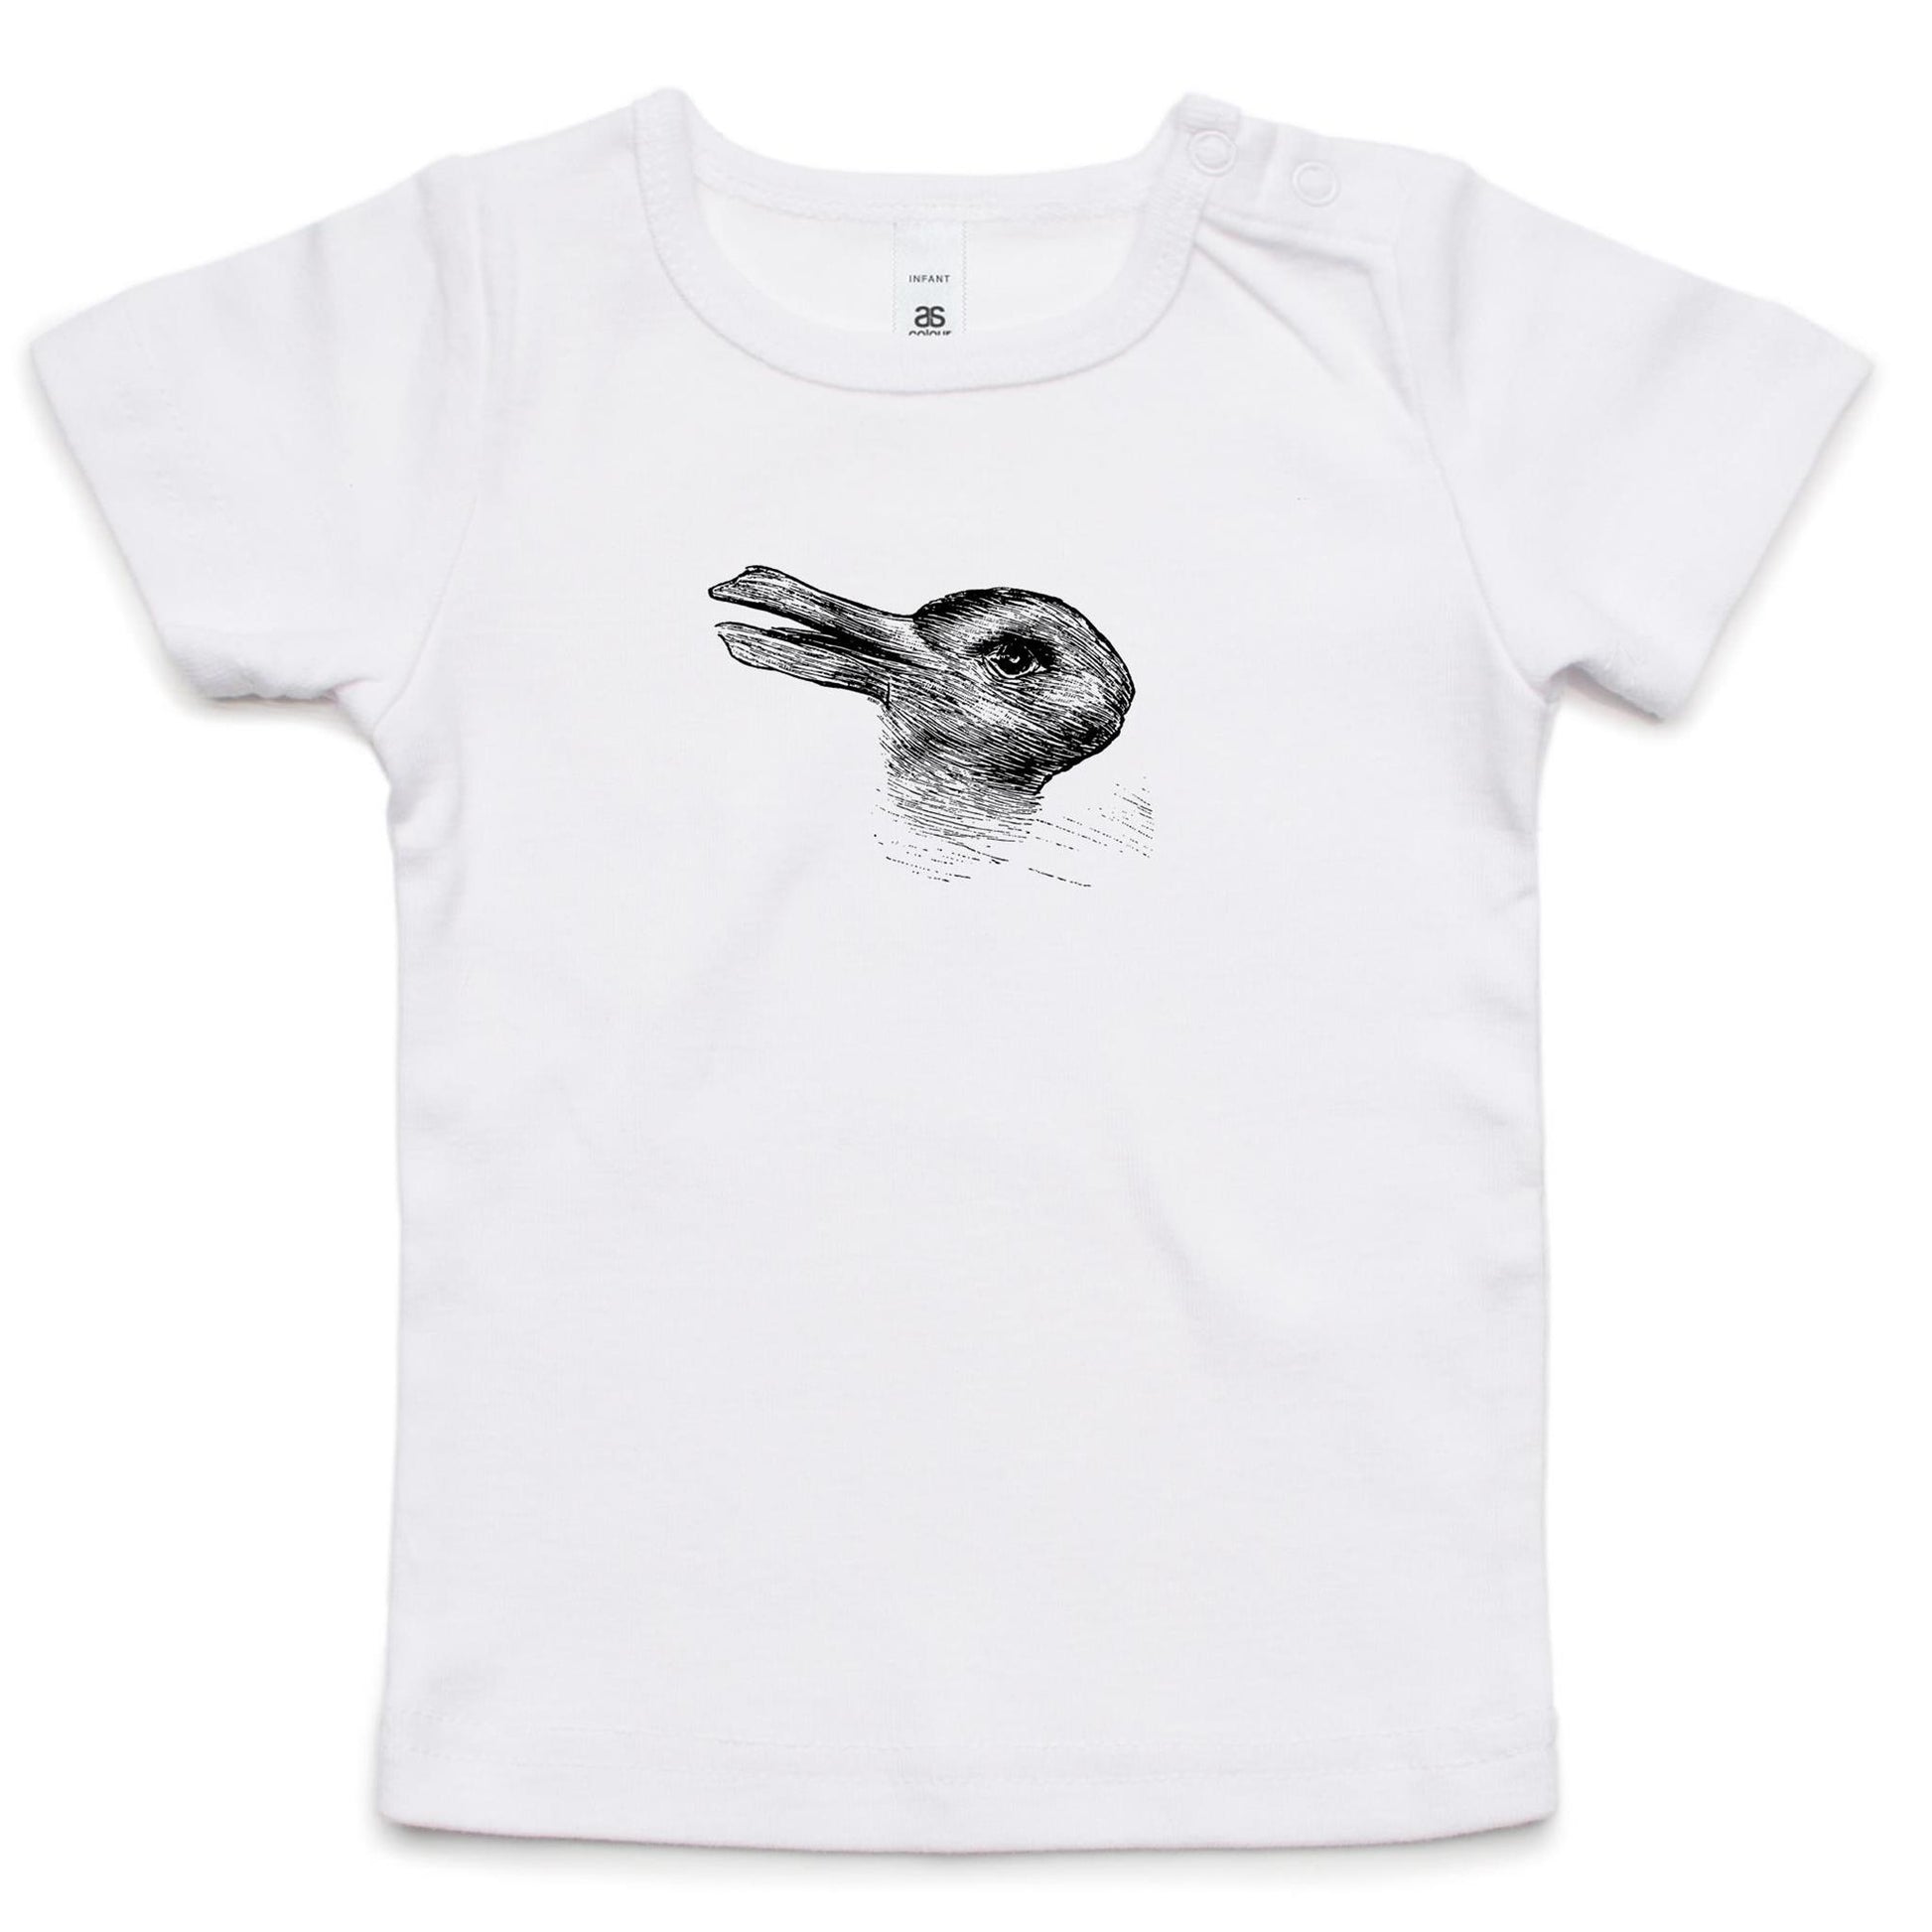 Duck-Rabbit T Shirts for Babies Since 1988 – REMO